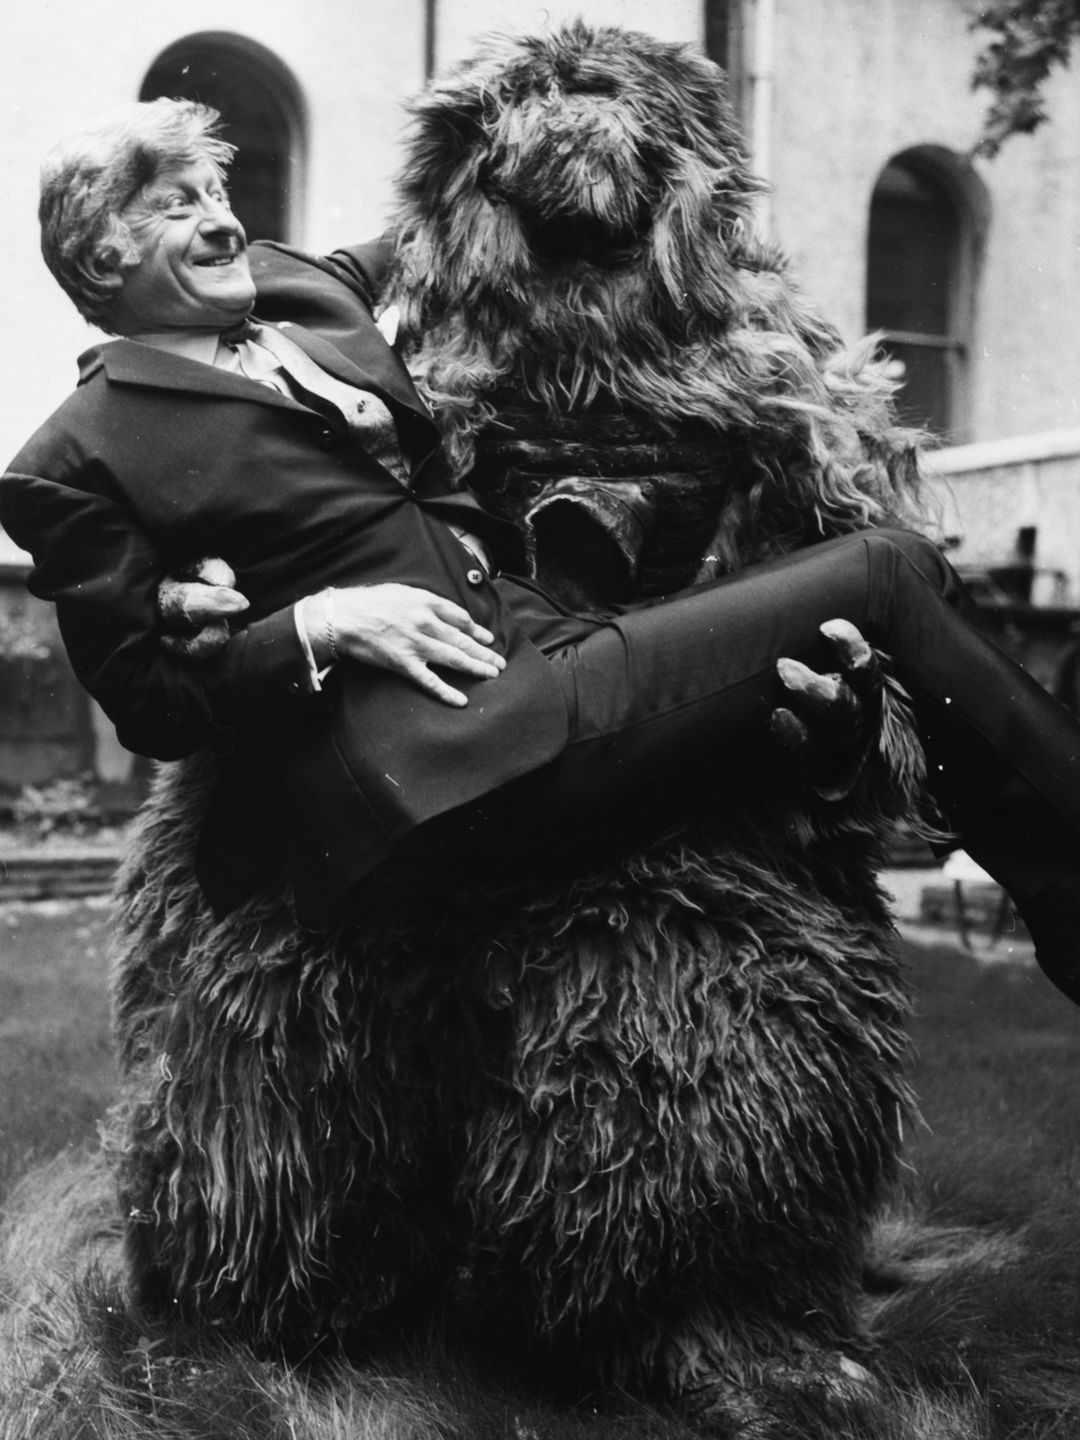 Jon Pertwee being carried by a Yeti